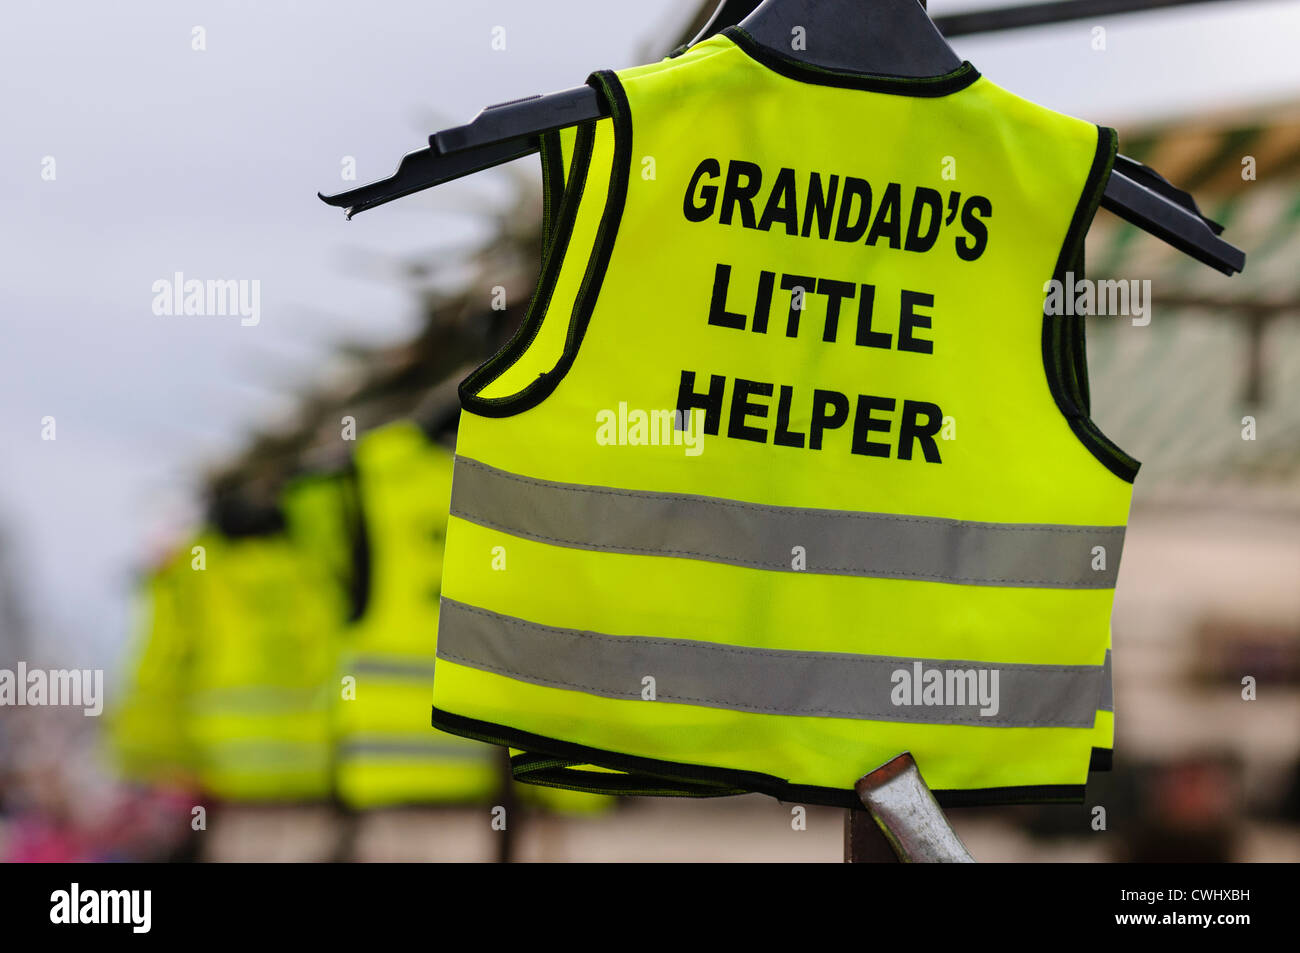 High visibility vests with slogan "Grandad's Little Helper" on sale at a market stall Stock Photo